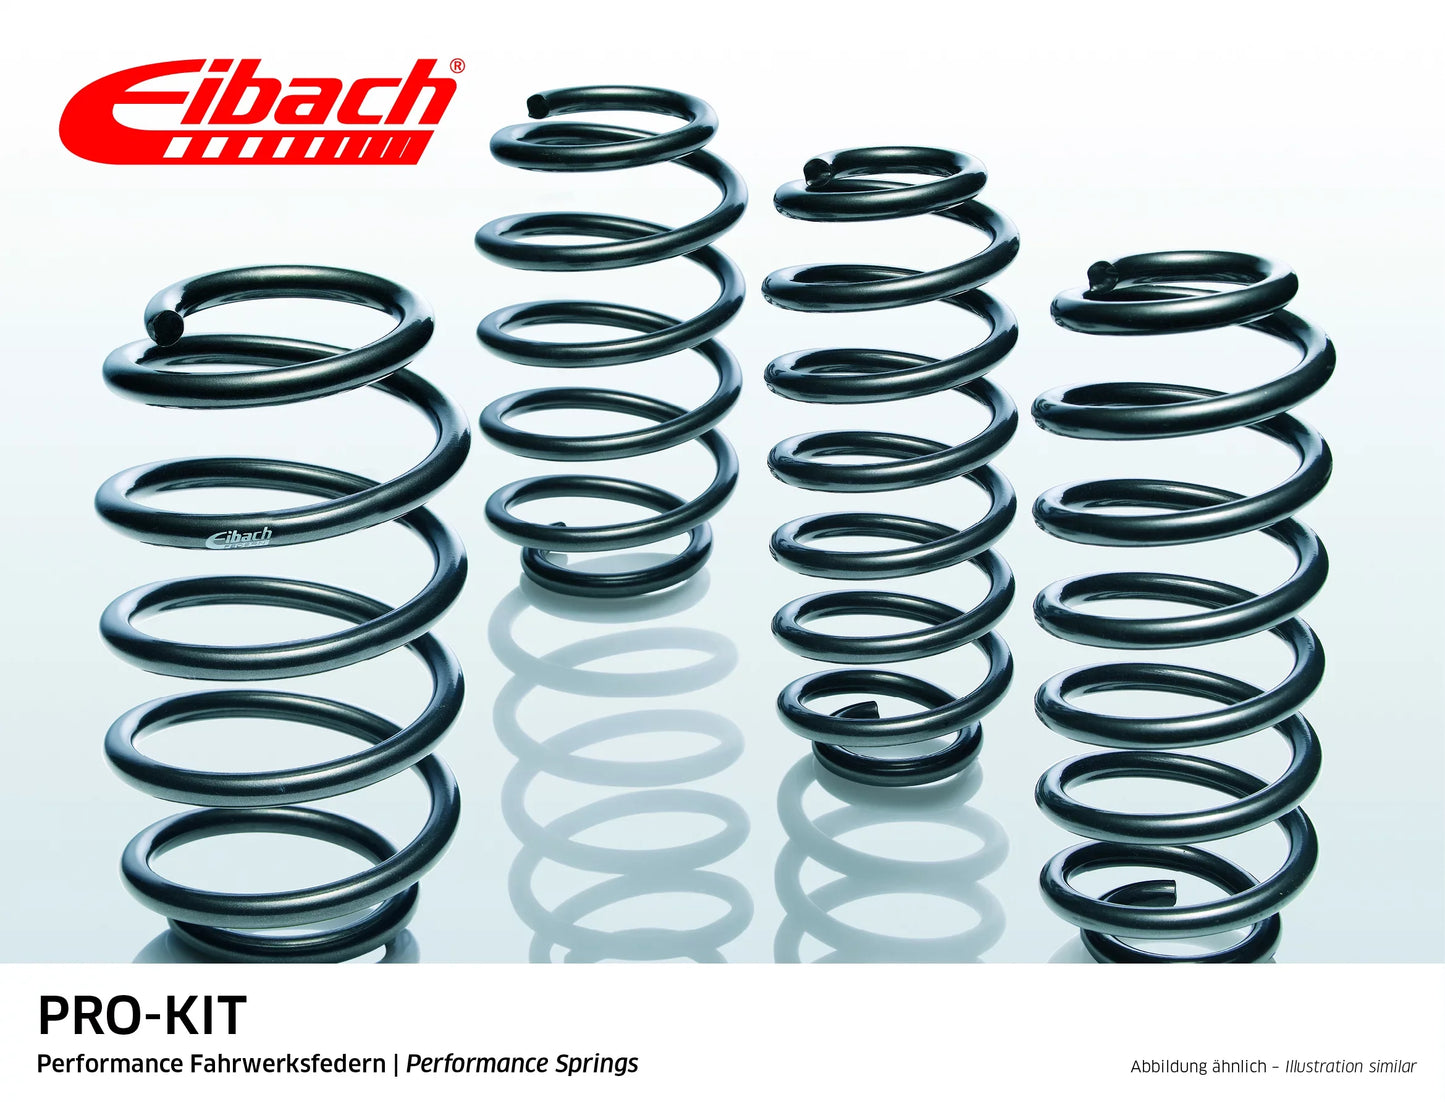 Eibach Pro-Kit Lowering Springs (E10-72-014-02-22) at £399.32